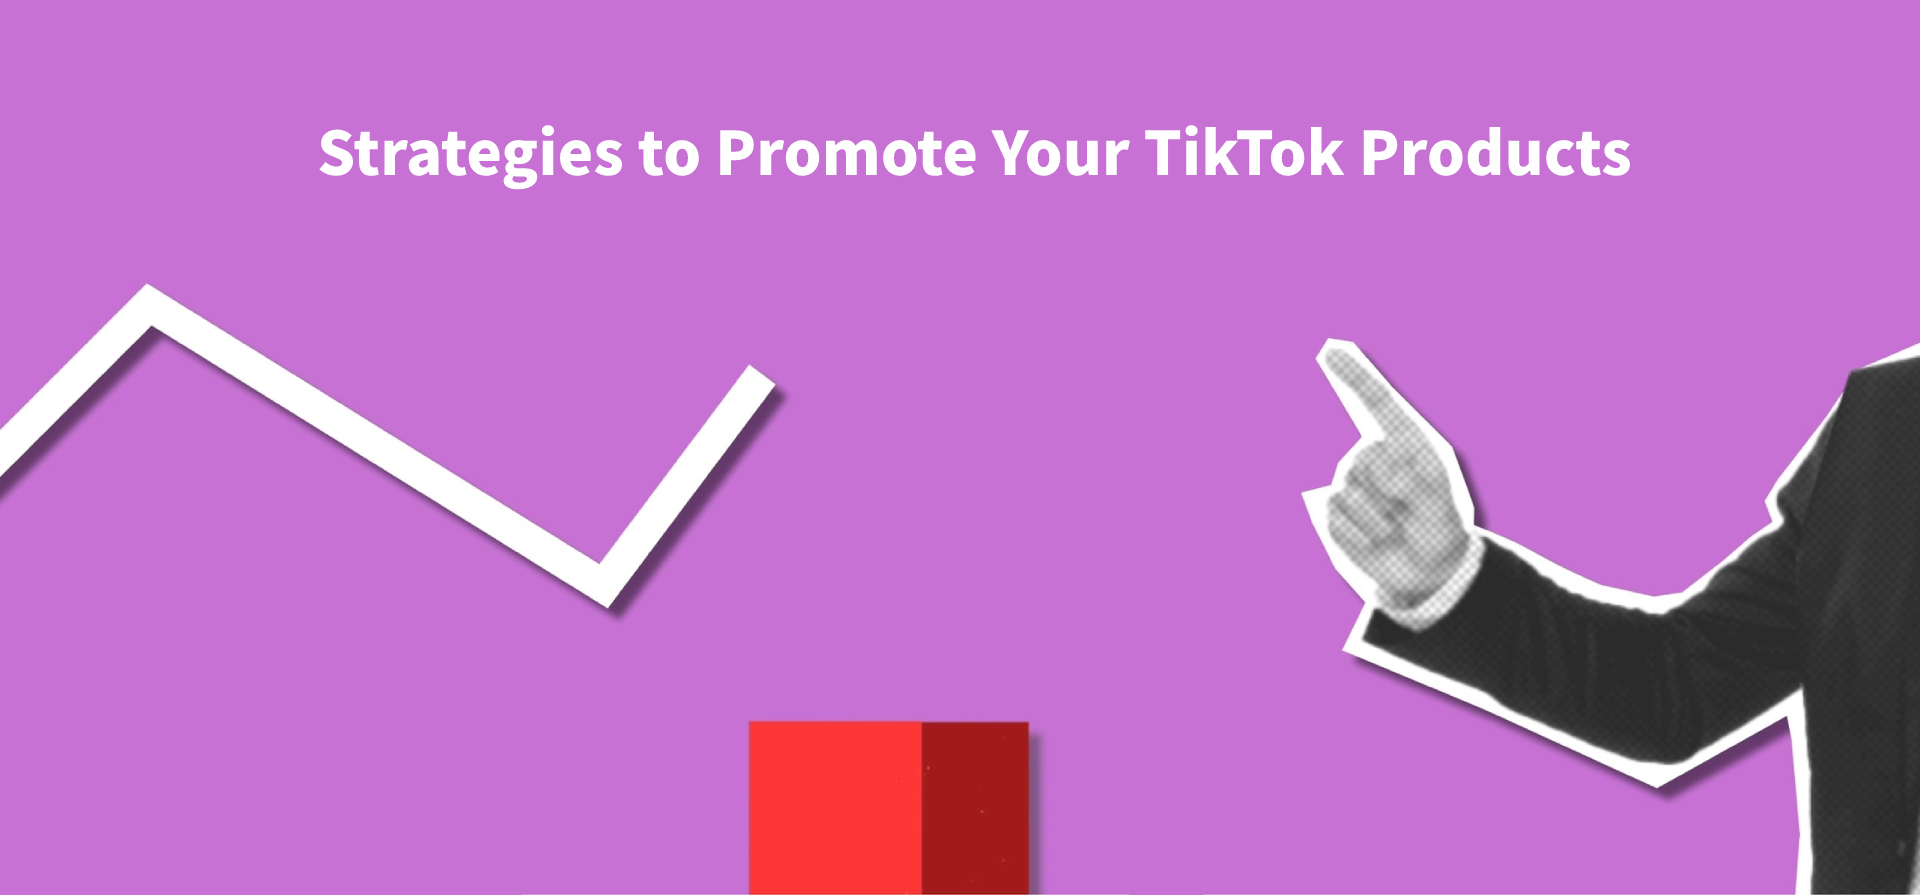 Strategies to Promote Your TikTok Products